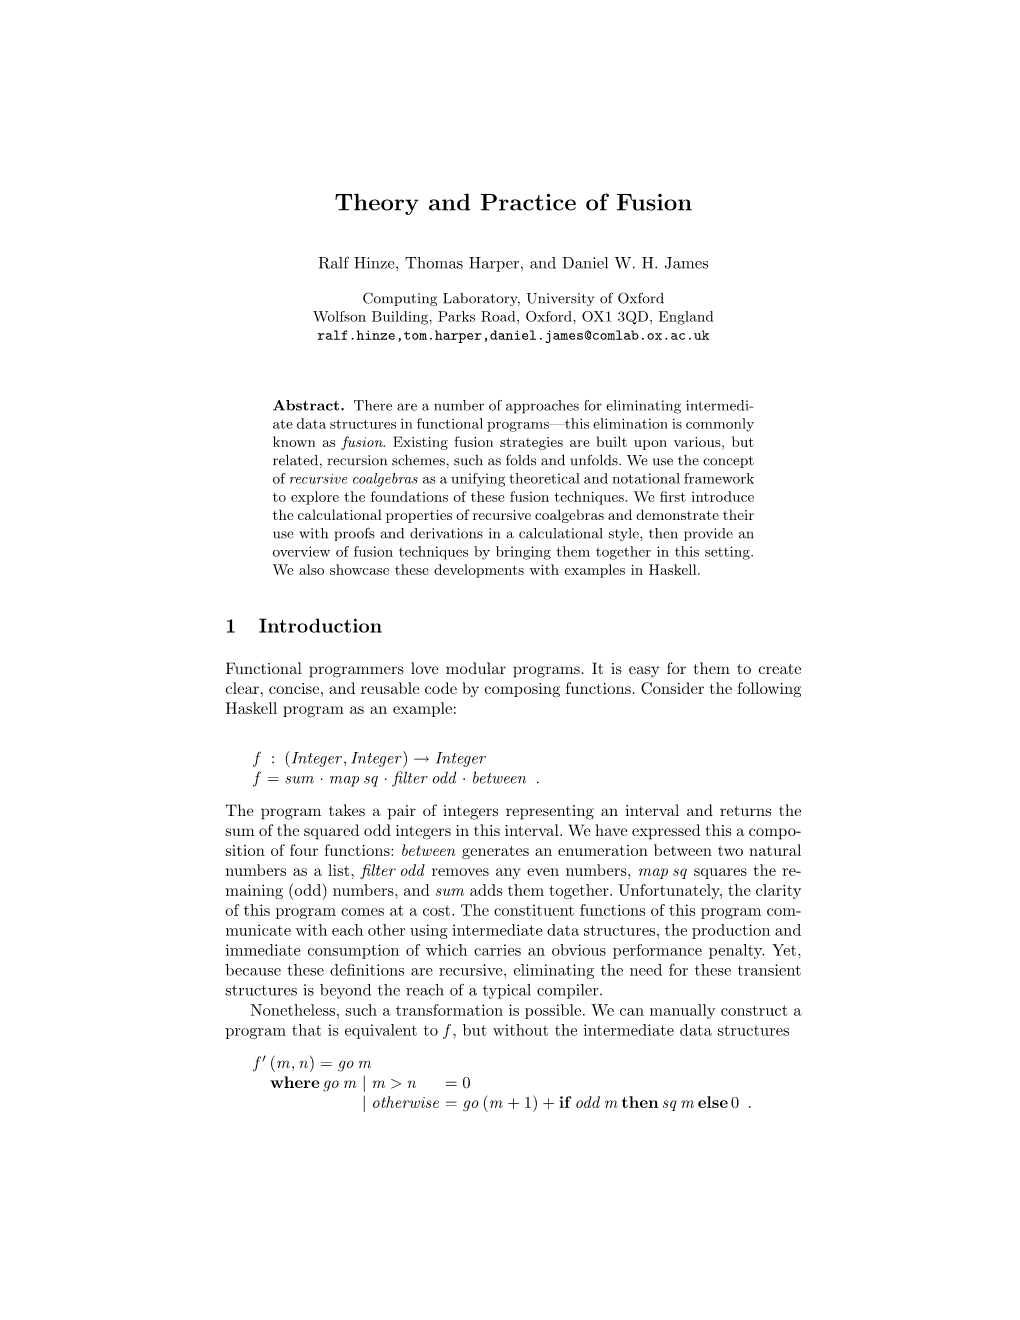 Theory and Practice of Fusion